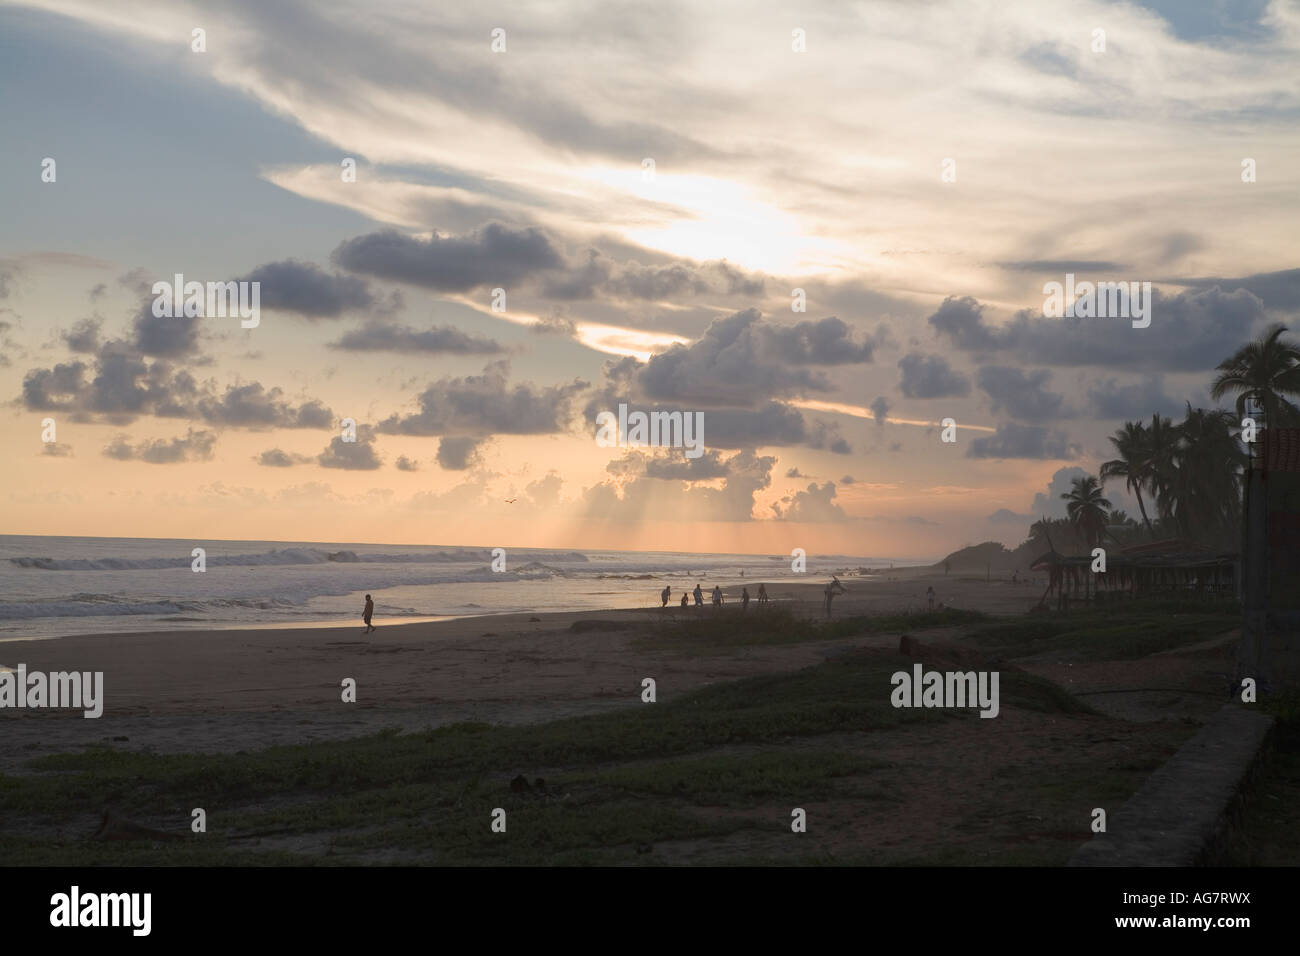 Spectacular sunset over Troncones Beach State of Guerrero Mexico Not Model Released Stock Photo